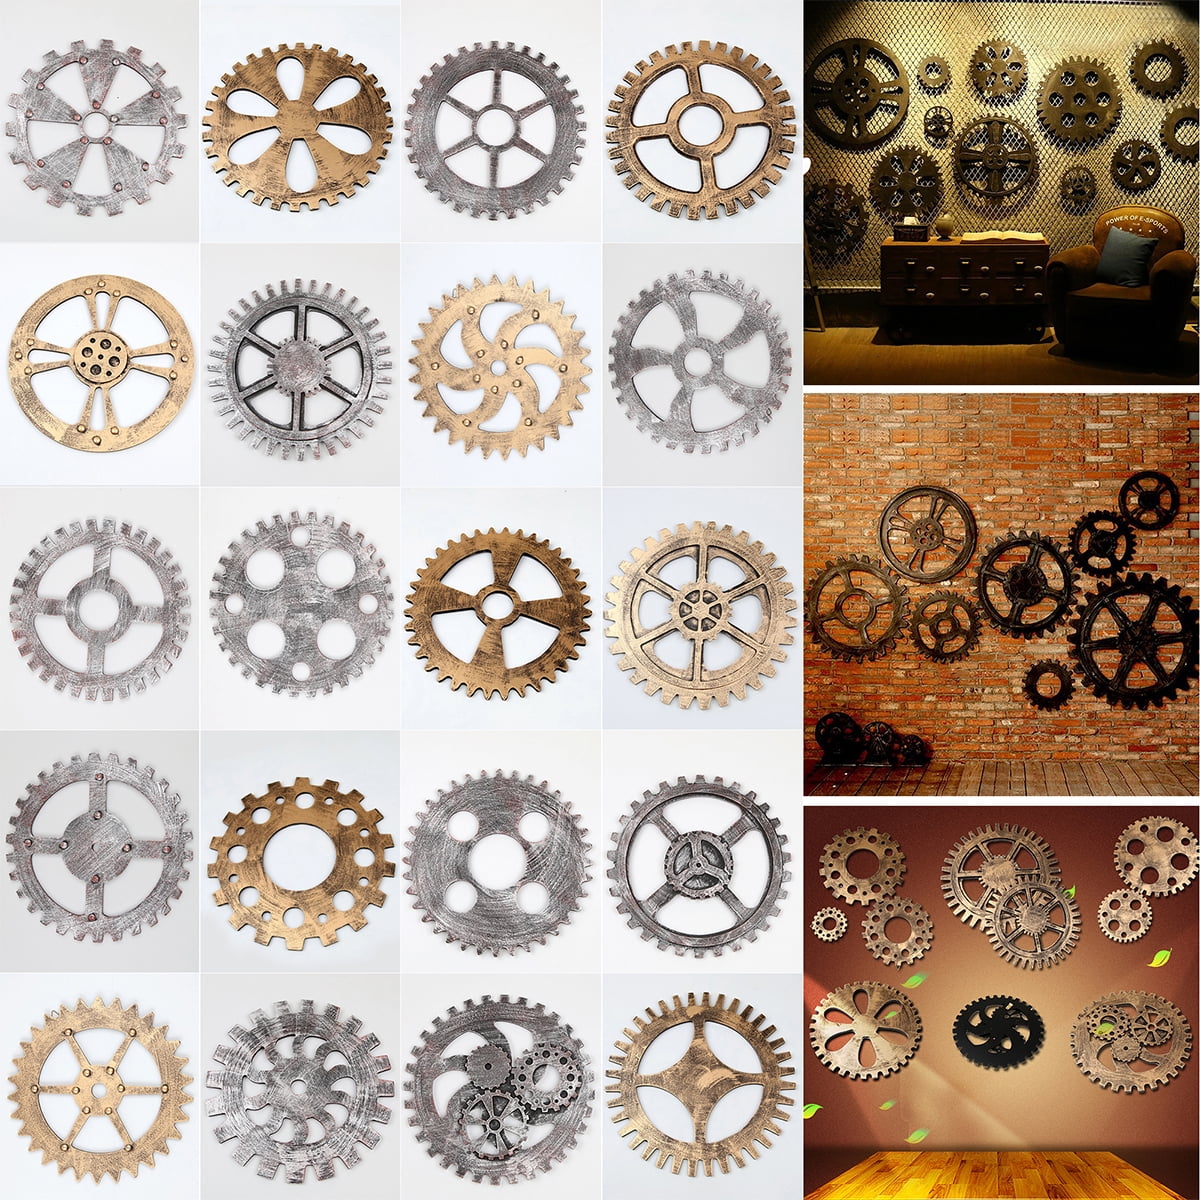 Antique Wooden Gear Wall Hanging Vintage Cogs Industrial Style Decor Steampunk 